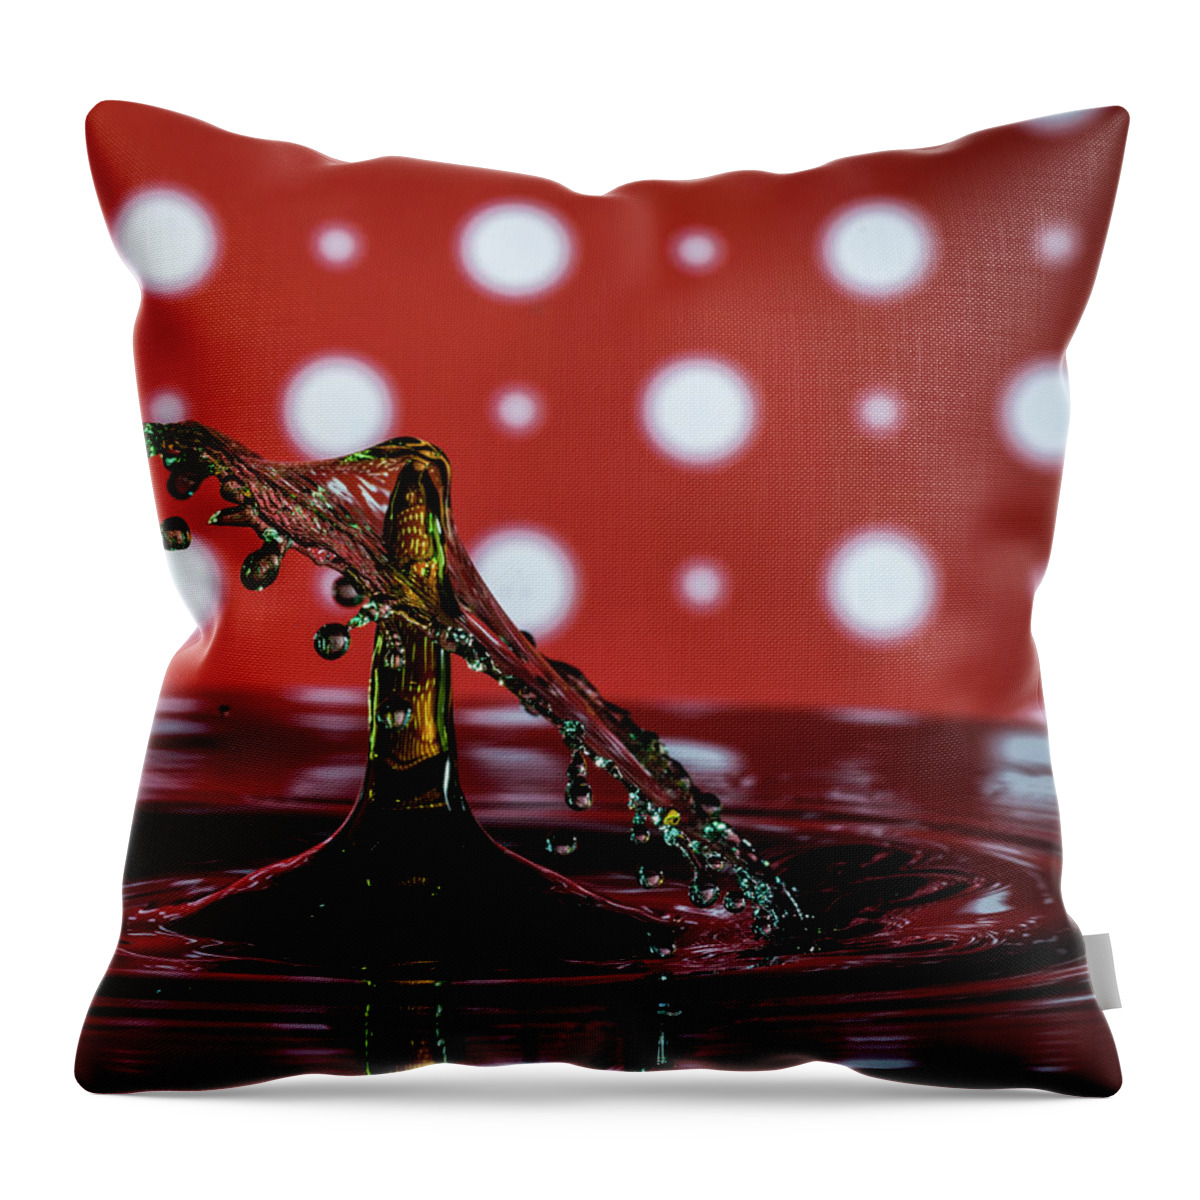 Jay Stockhaus Throw Pillow featuring the photograph Collision 2018-7 by Jay Stockhaus